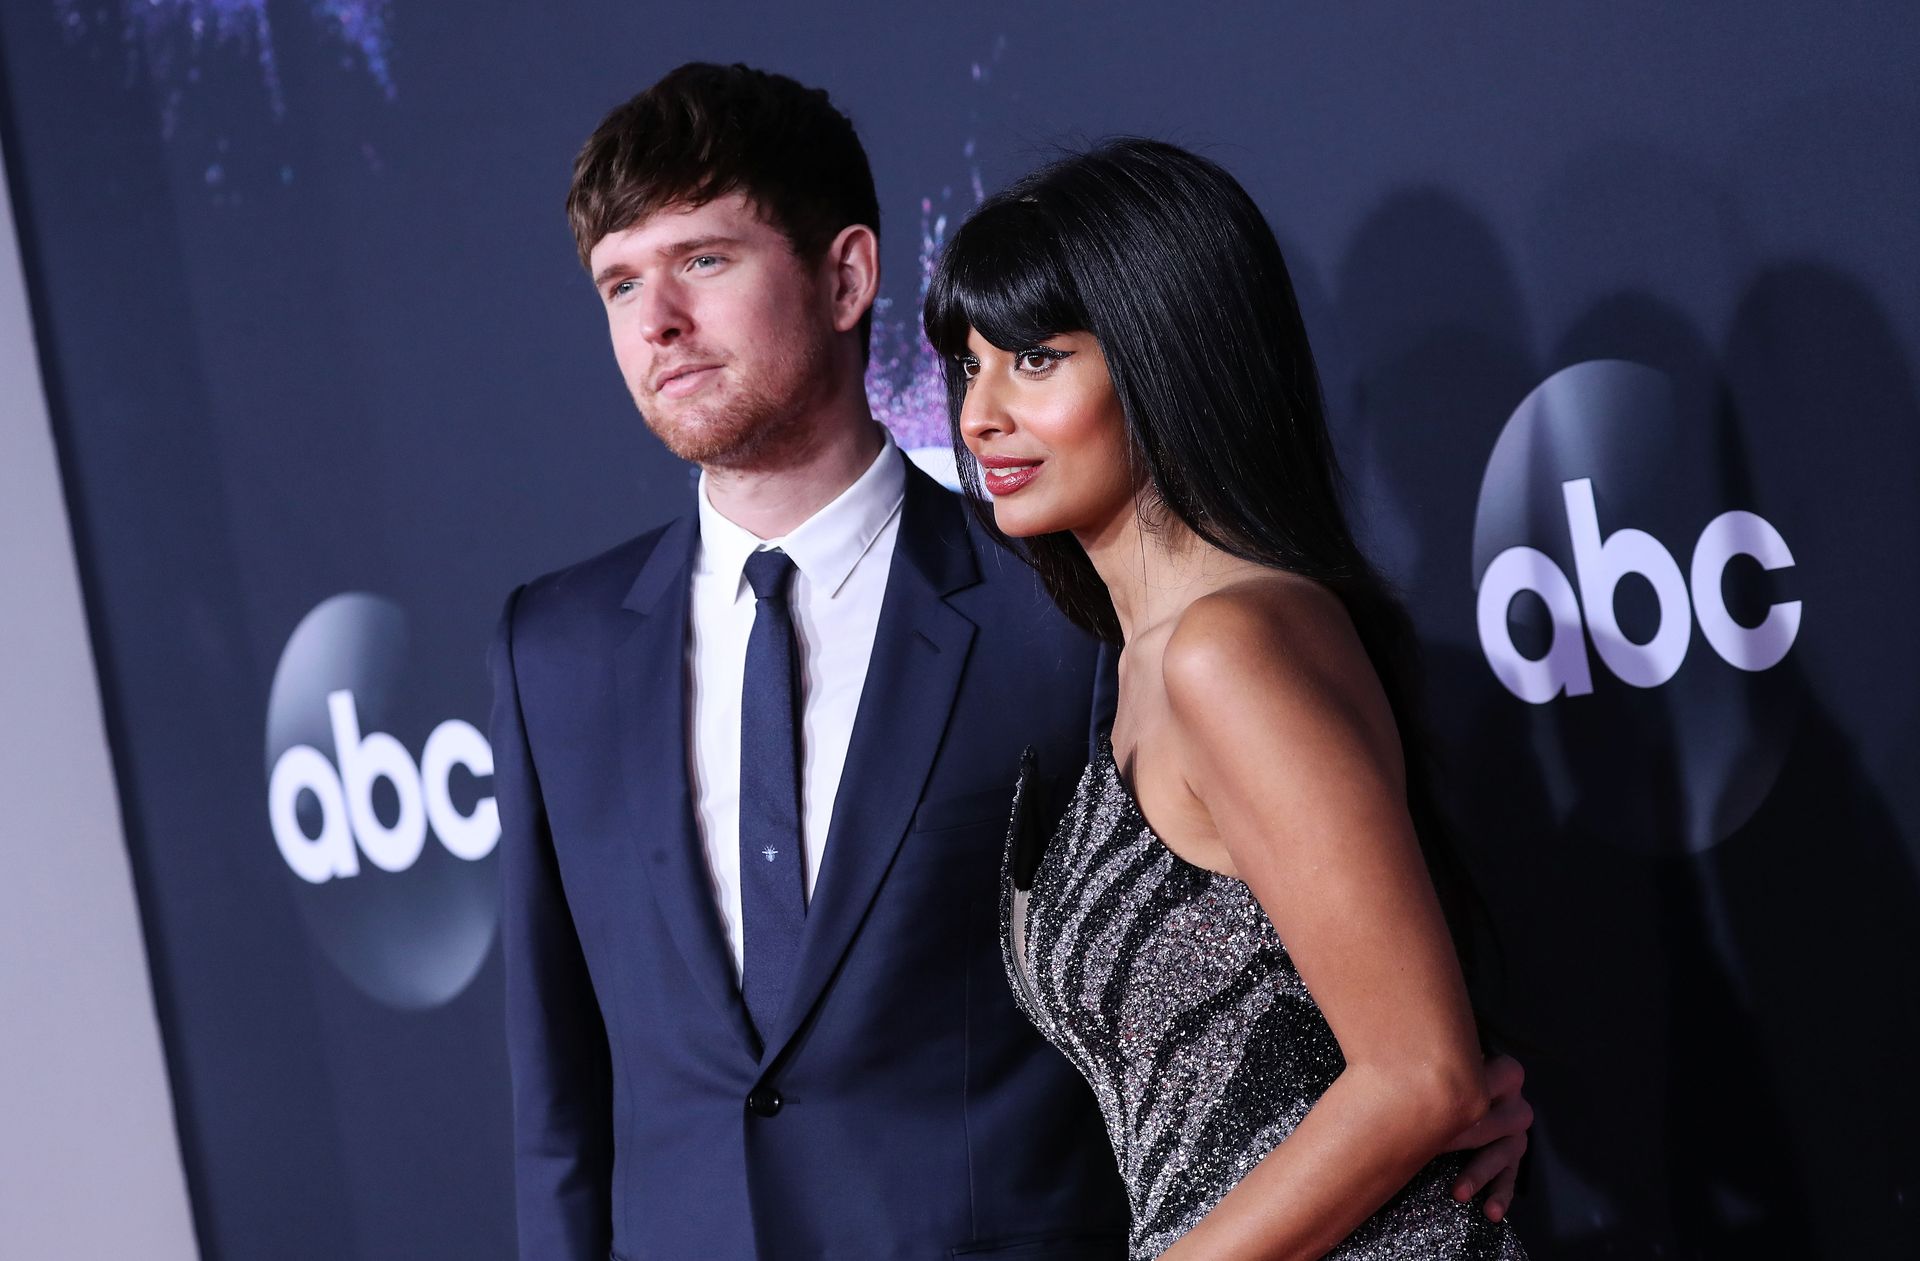 Jameela Jamil showed off her cleavage at the 2019 American Music Awards at ...